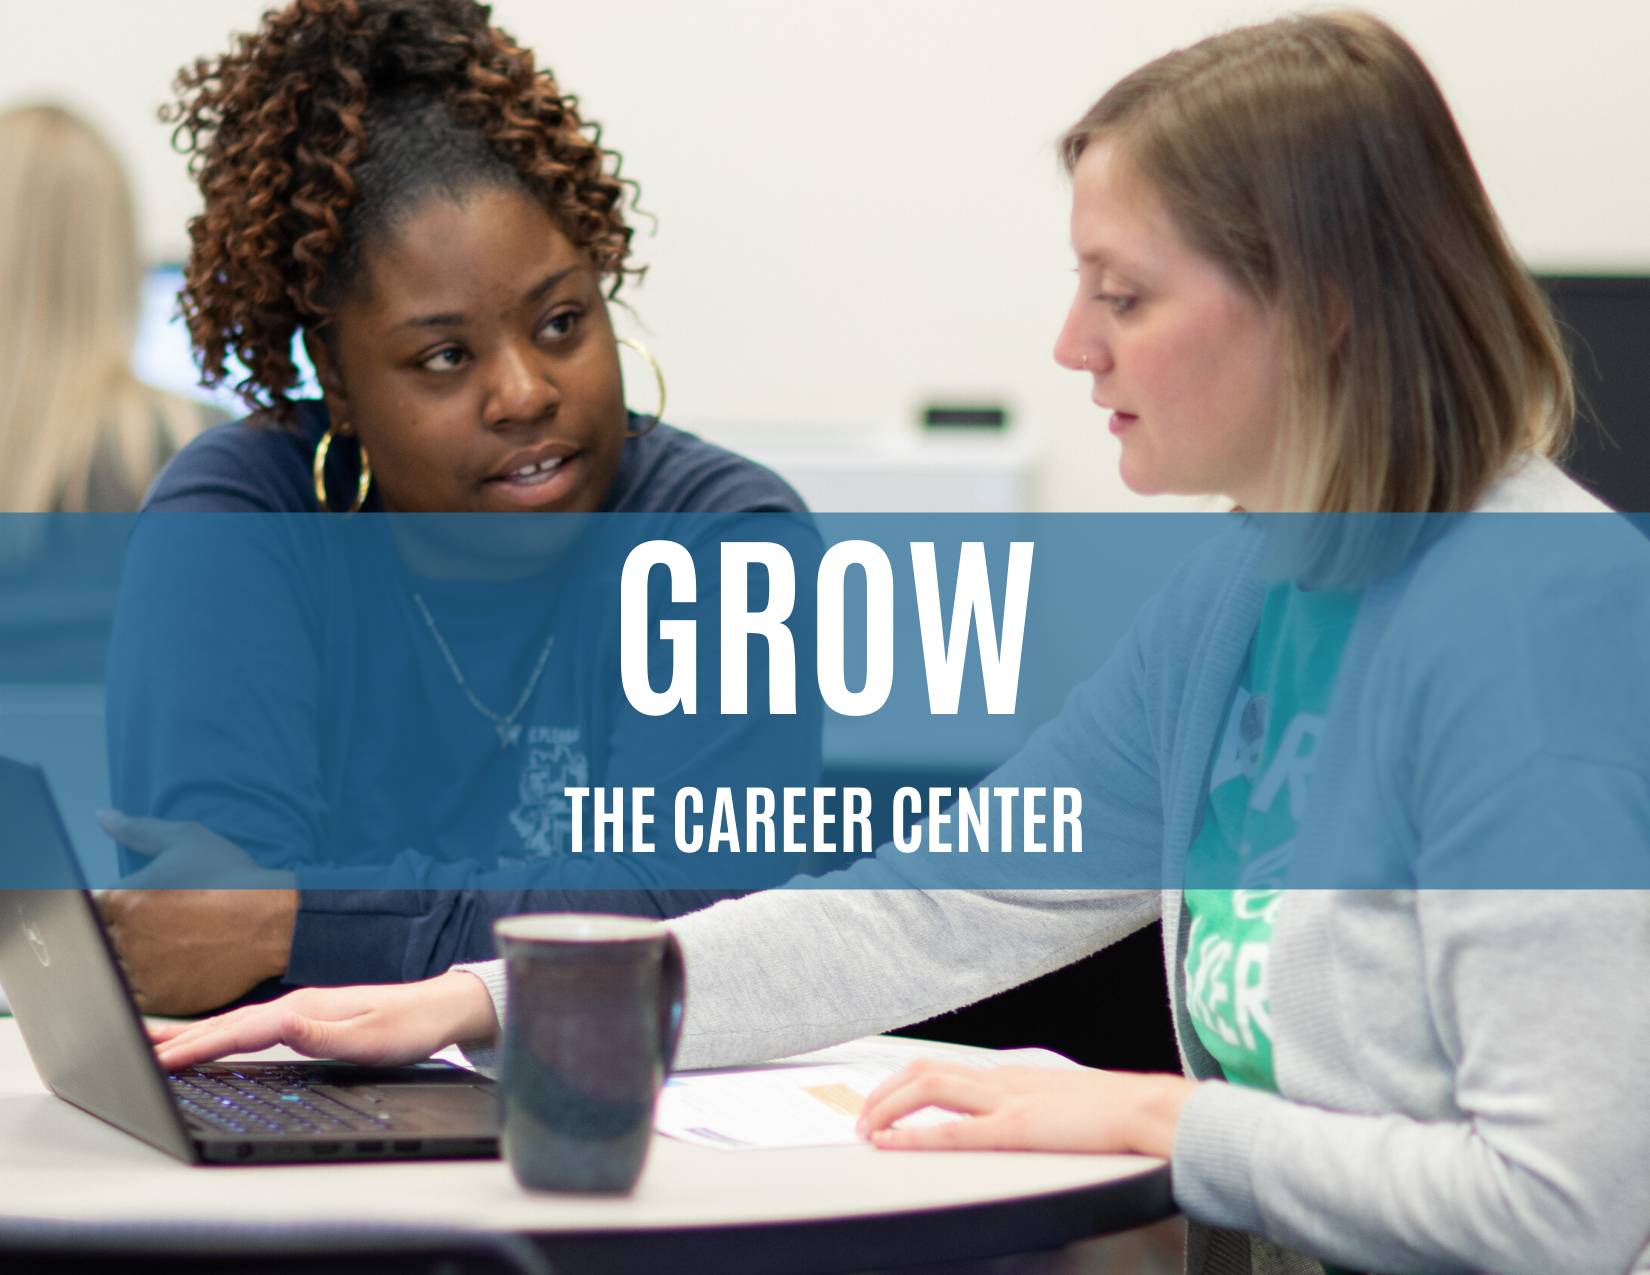 Grow with the career center